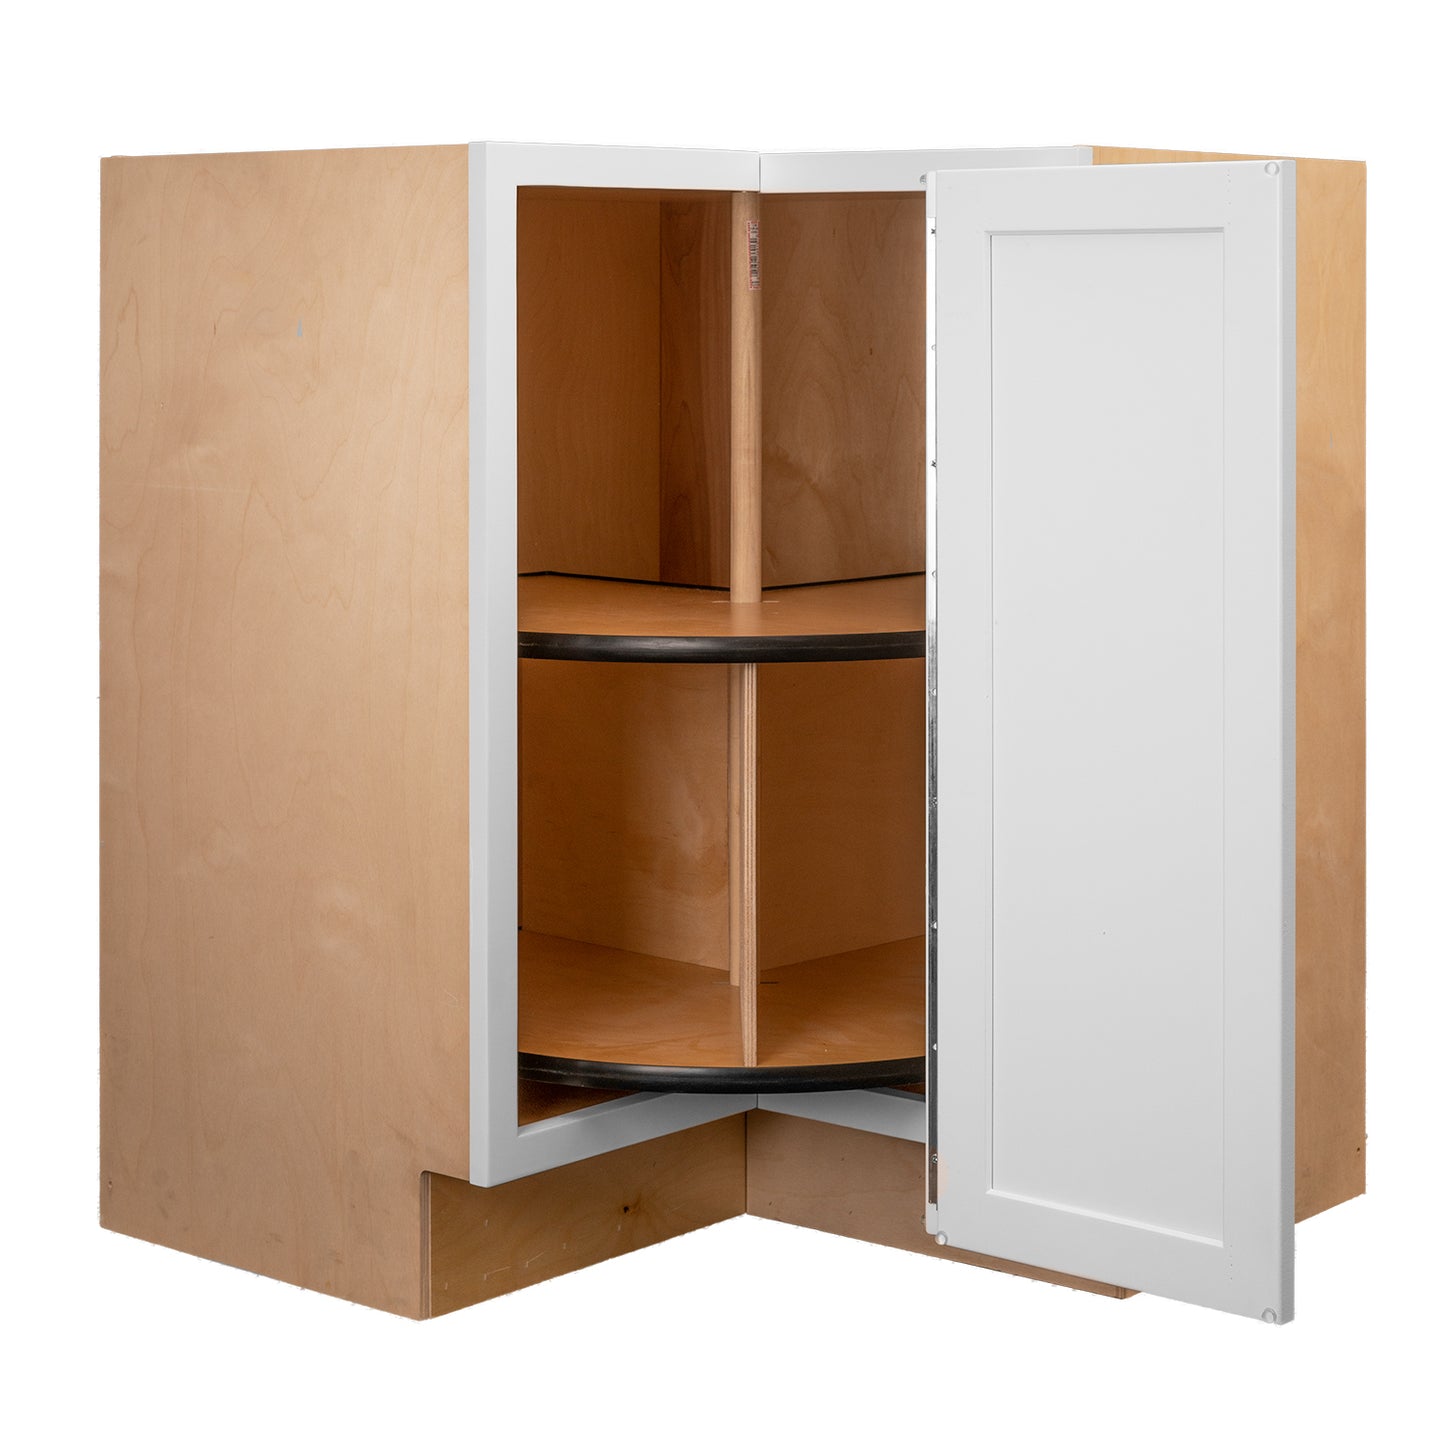 Quicklock RTA (Ready-to-Assemble) Pure White Lazy Susan Cabinet | 18"D x 30" W x 34.5"